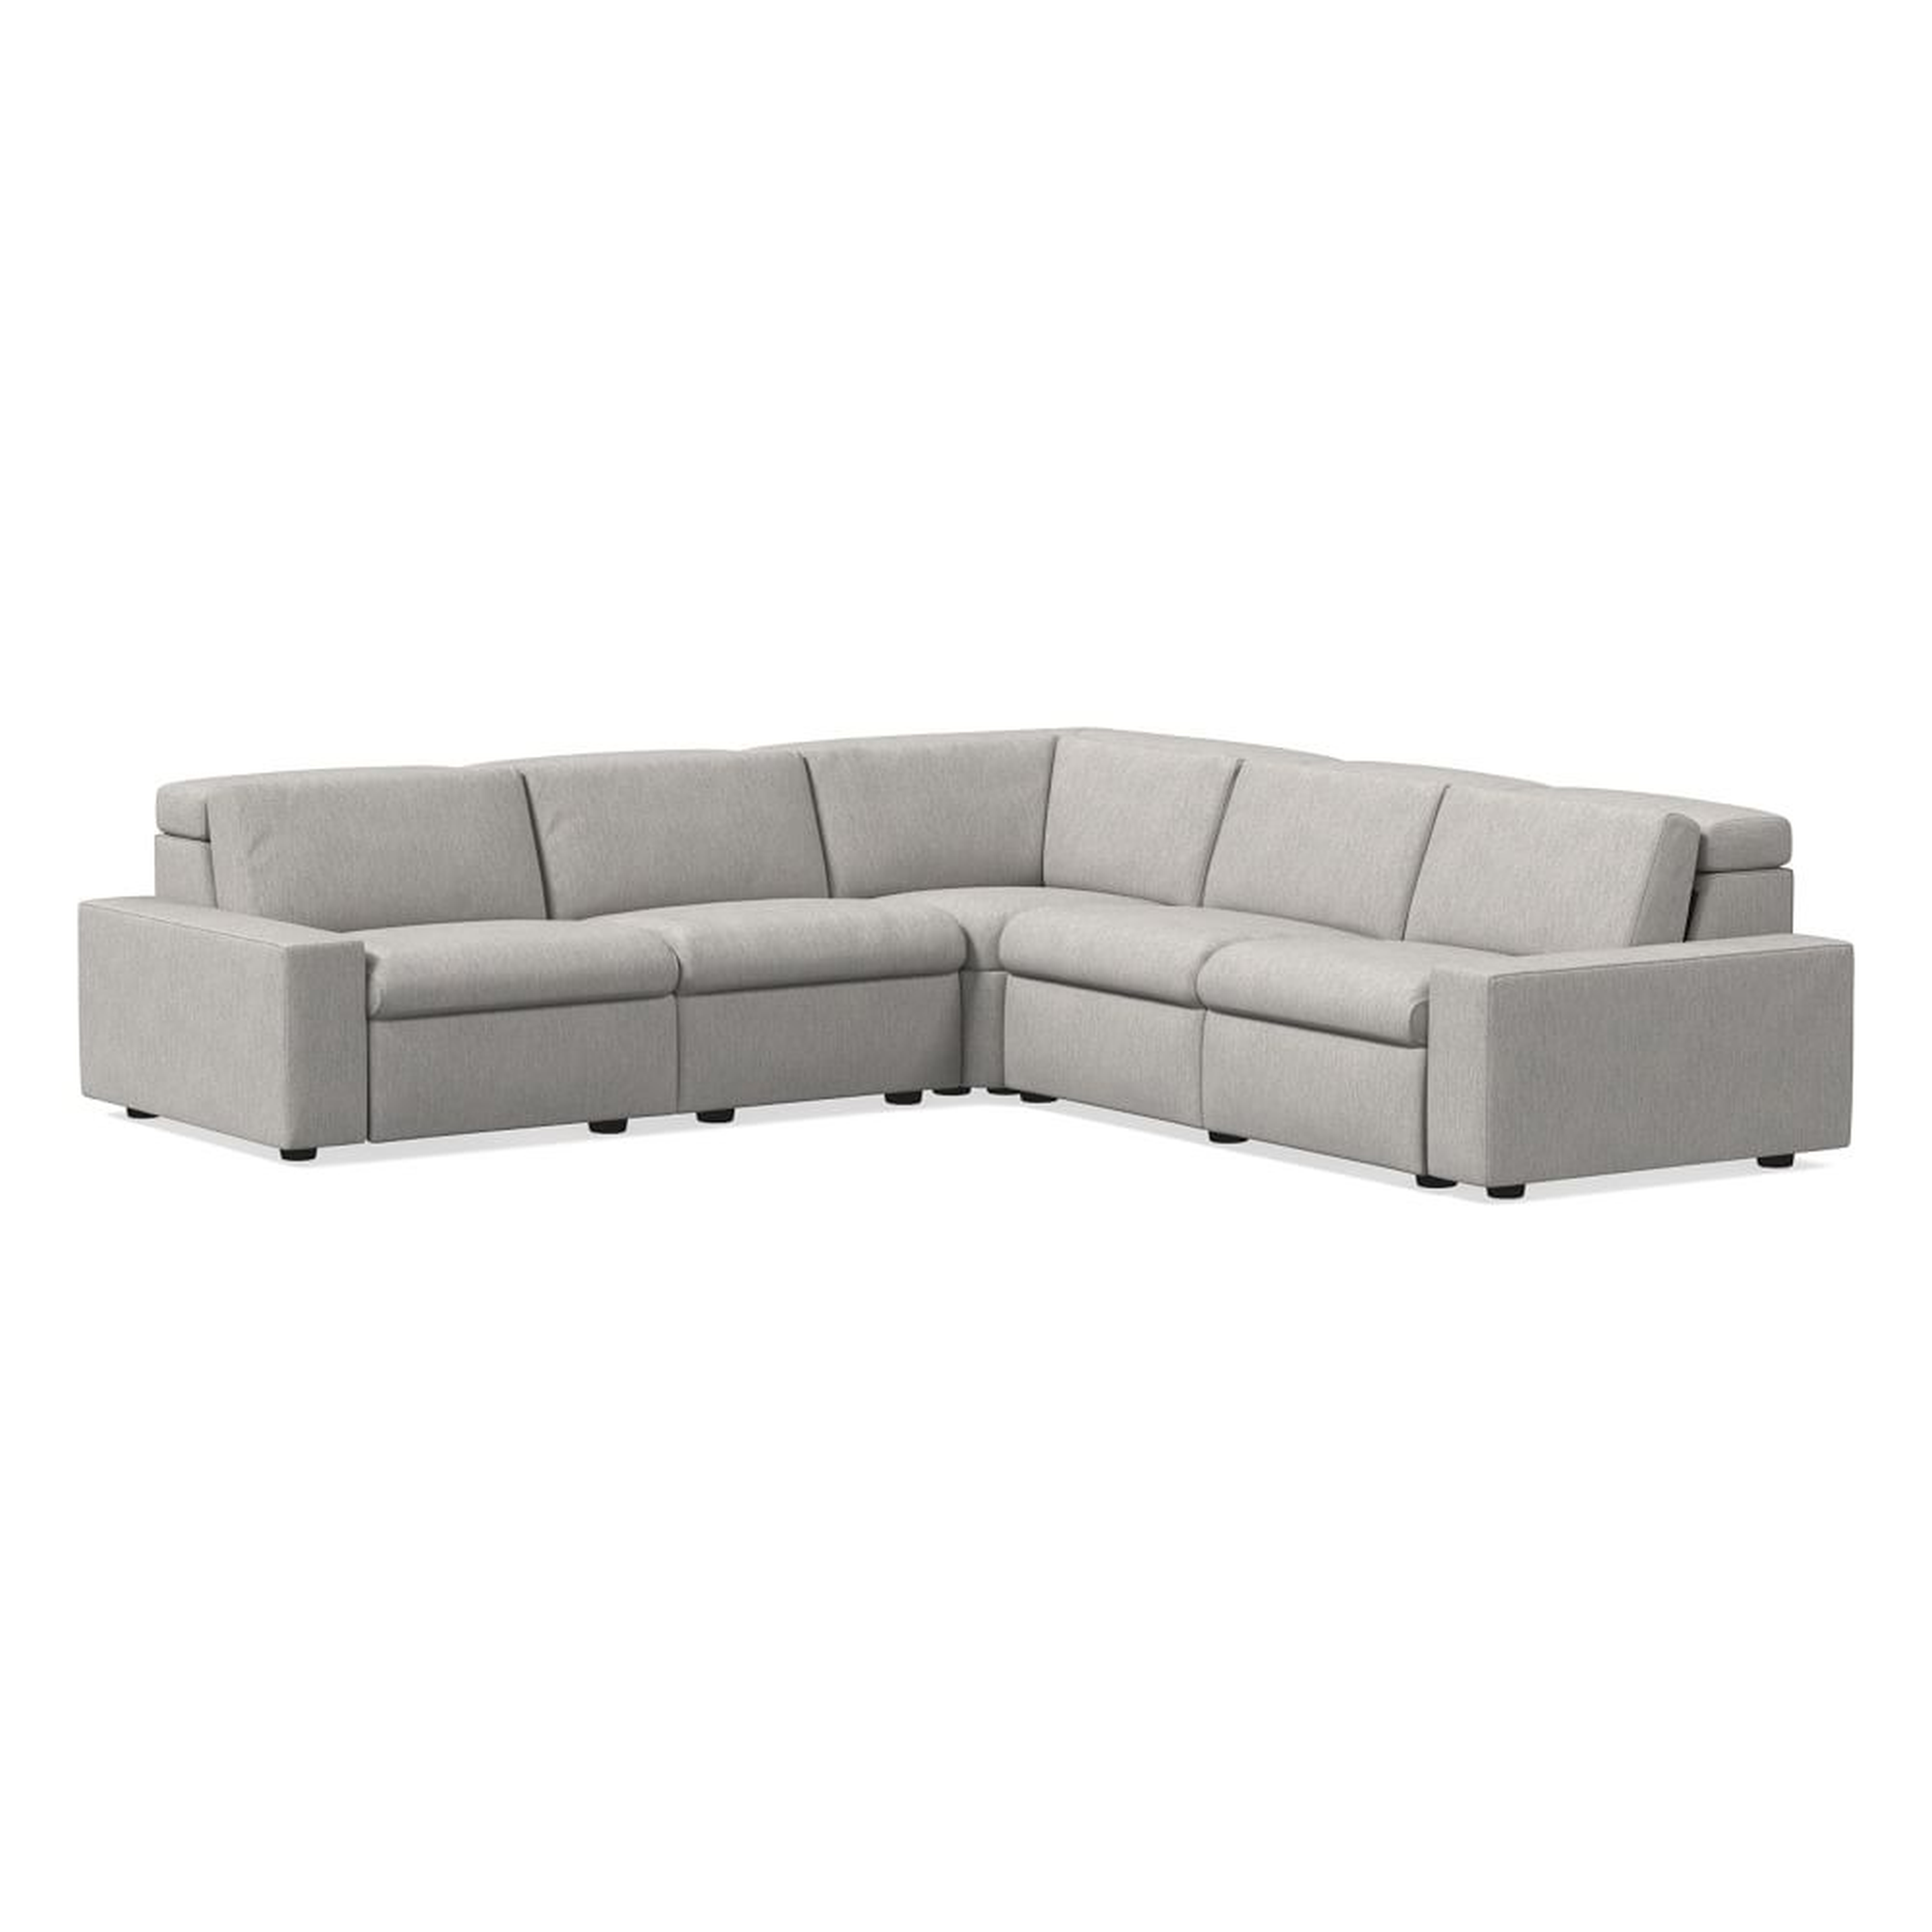 Enzo 114" 5-Piece L-Shaped Reclining Sectional, Two Basic Arms, Performance Coastal Linen, Storm Gray - West Elm